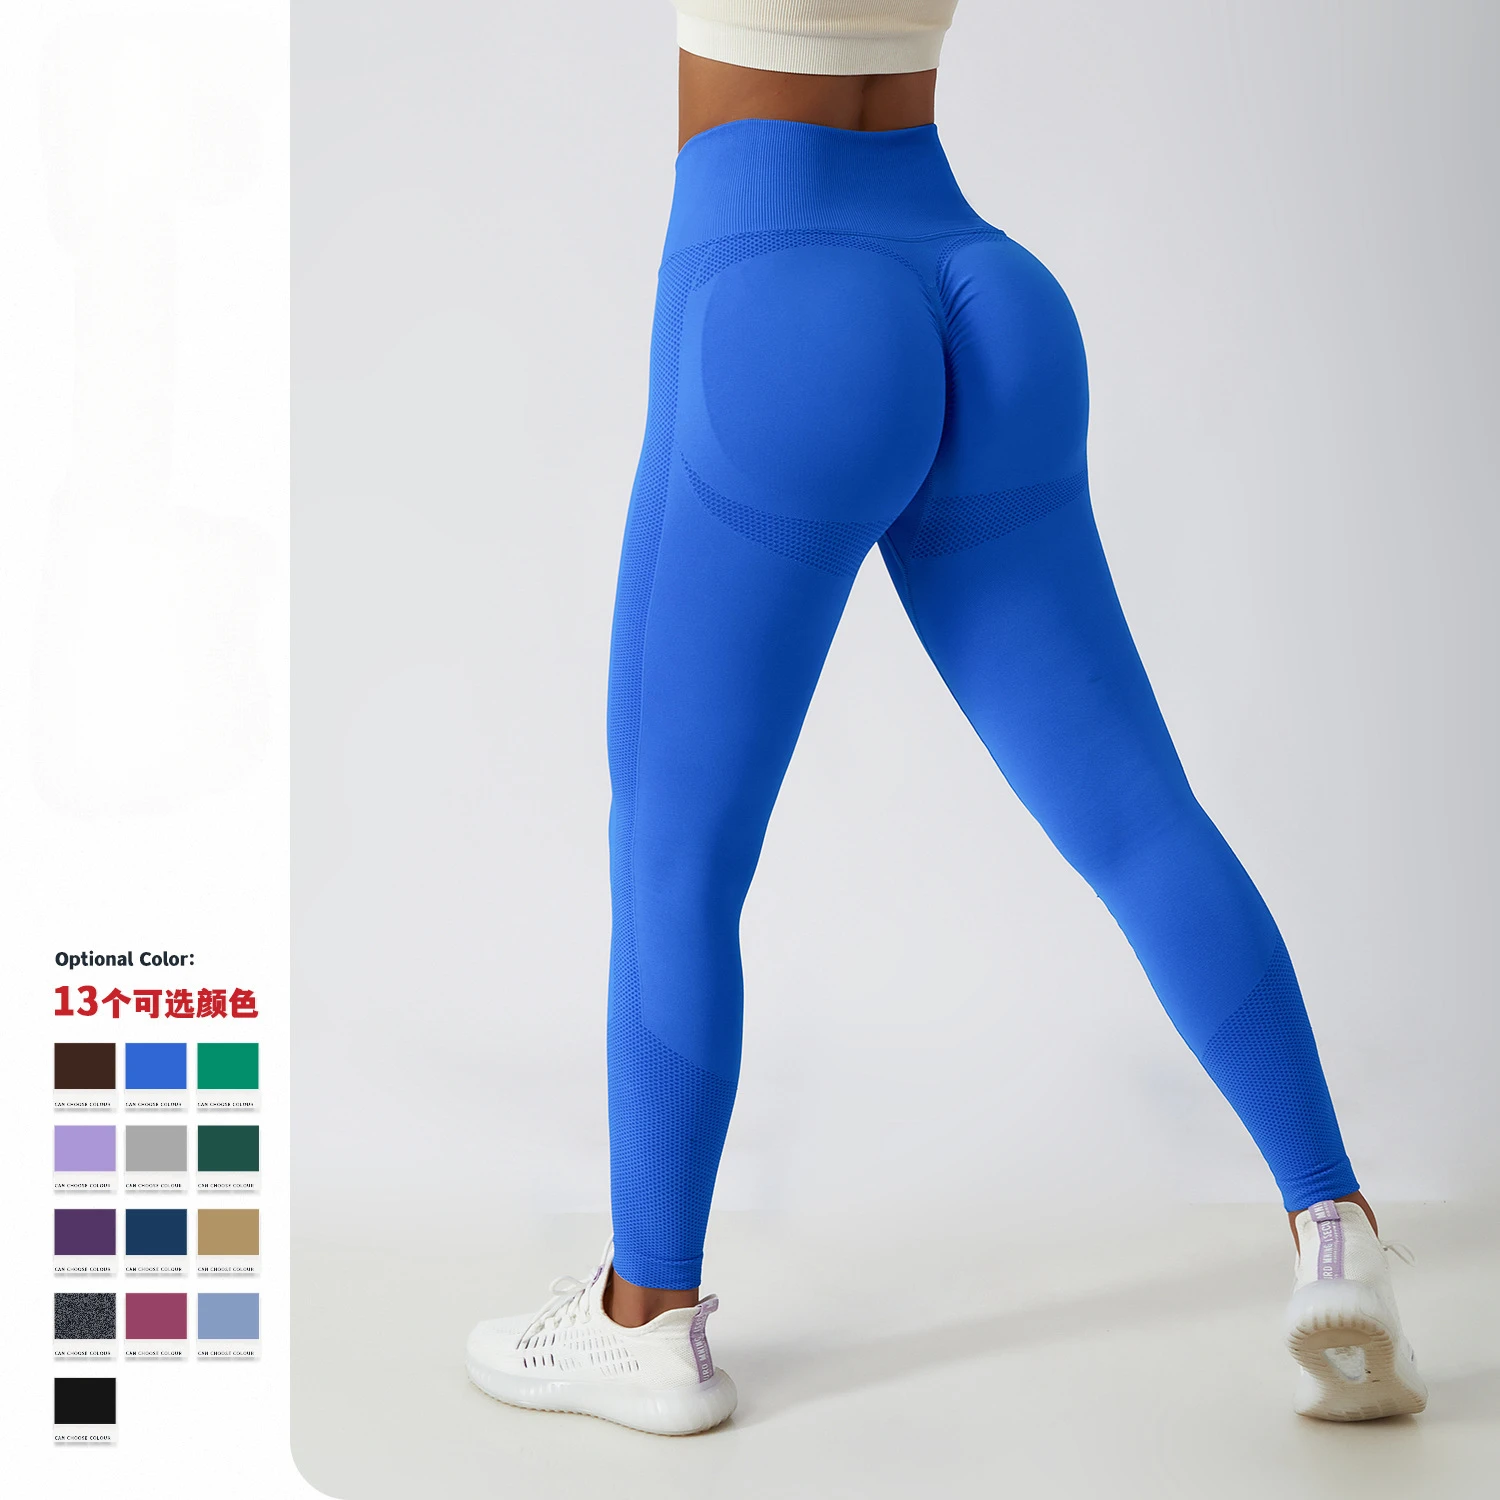 Outdoor running fitness pants, hip lifting yoga pants, seamless tight fitting, high waisted, breathable sports for women autumn winter outdoor sports tight naked fitness wear high waisted yoga clothing three piece set